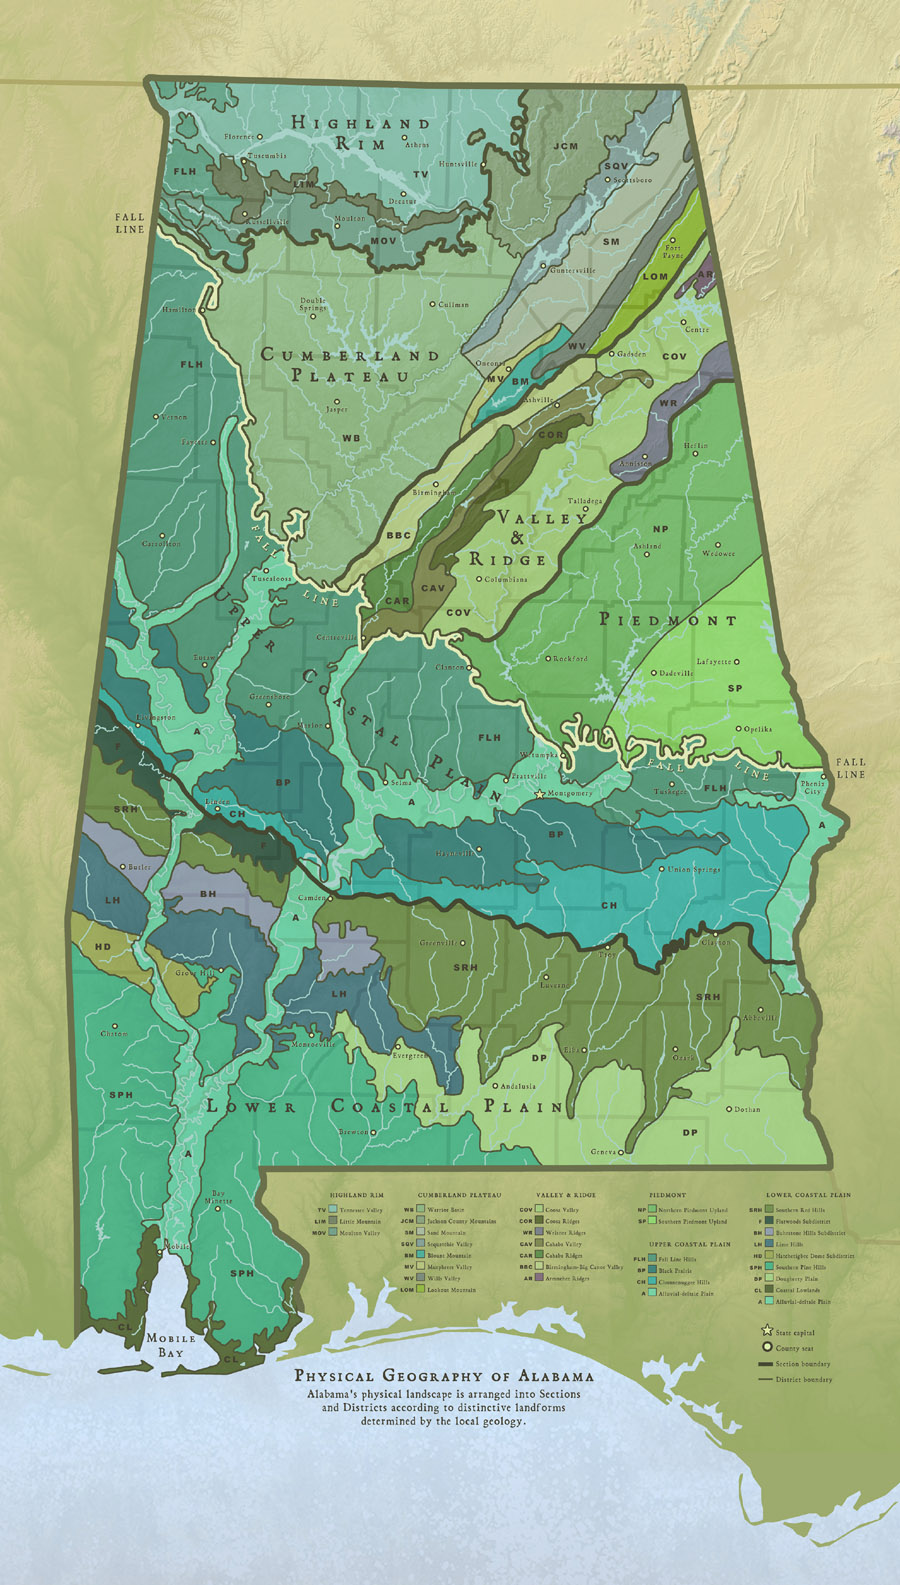 Map of the physical geography of Alabama by Karen Carr